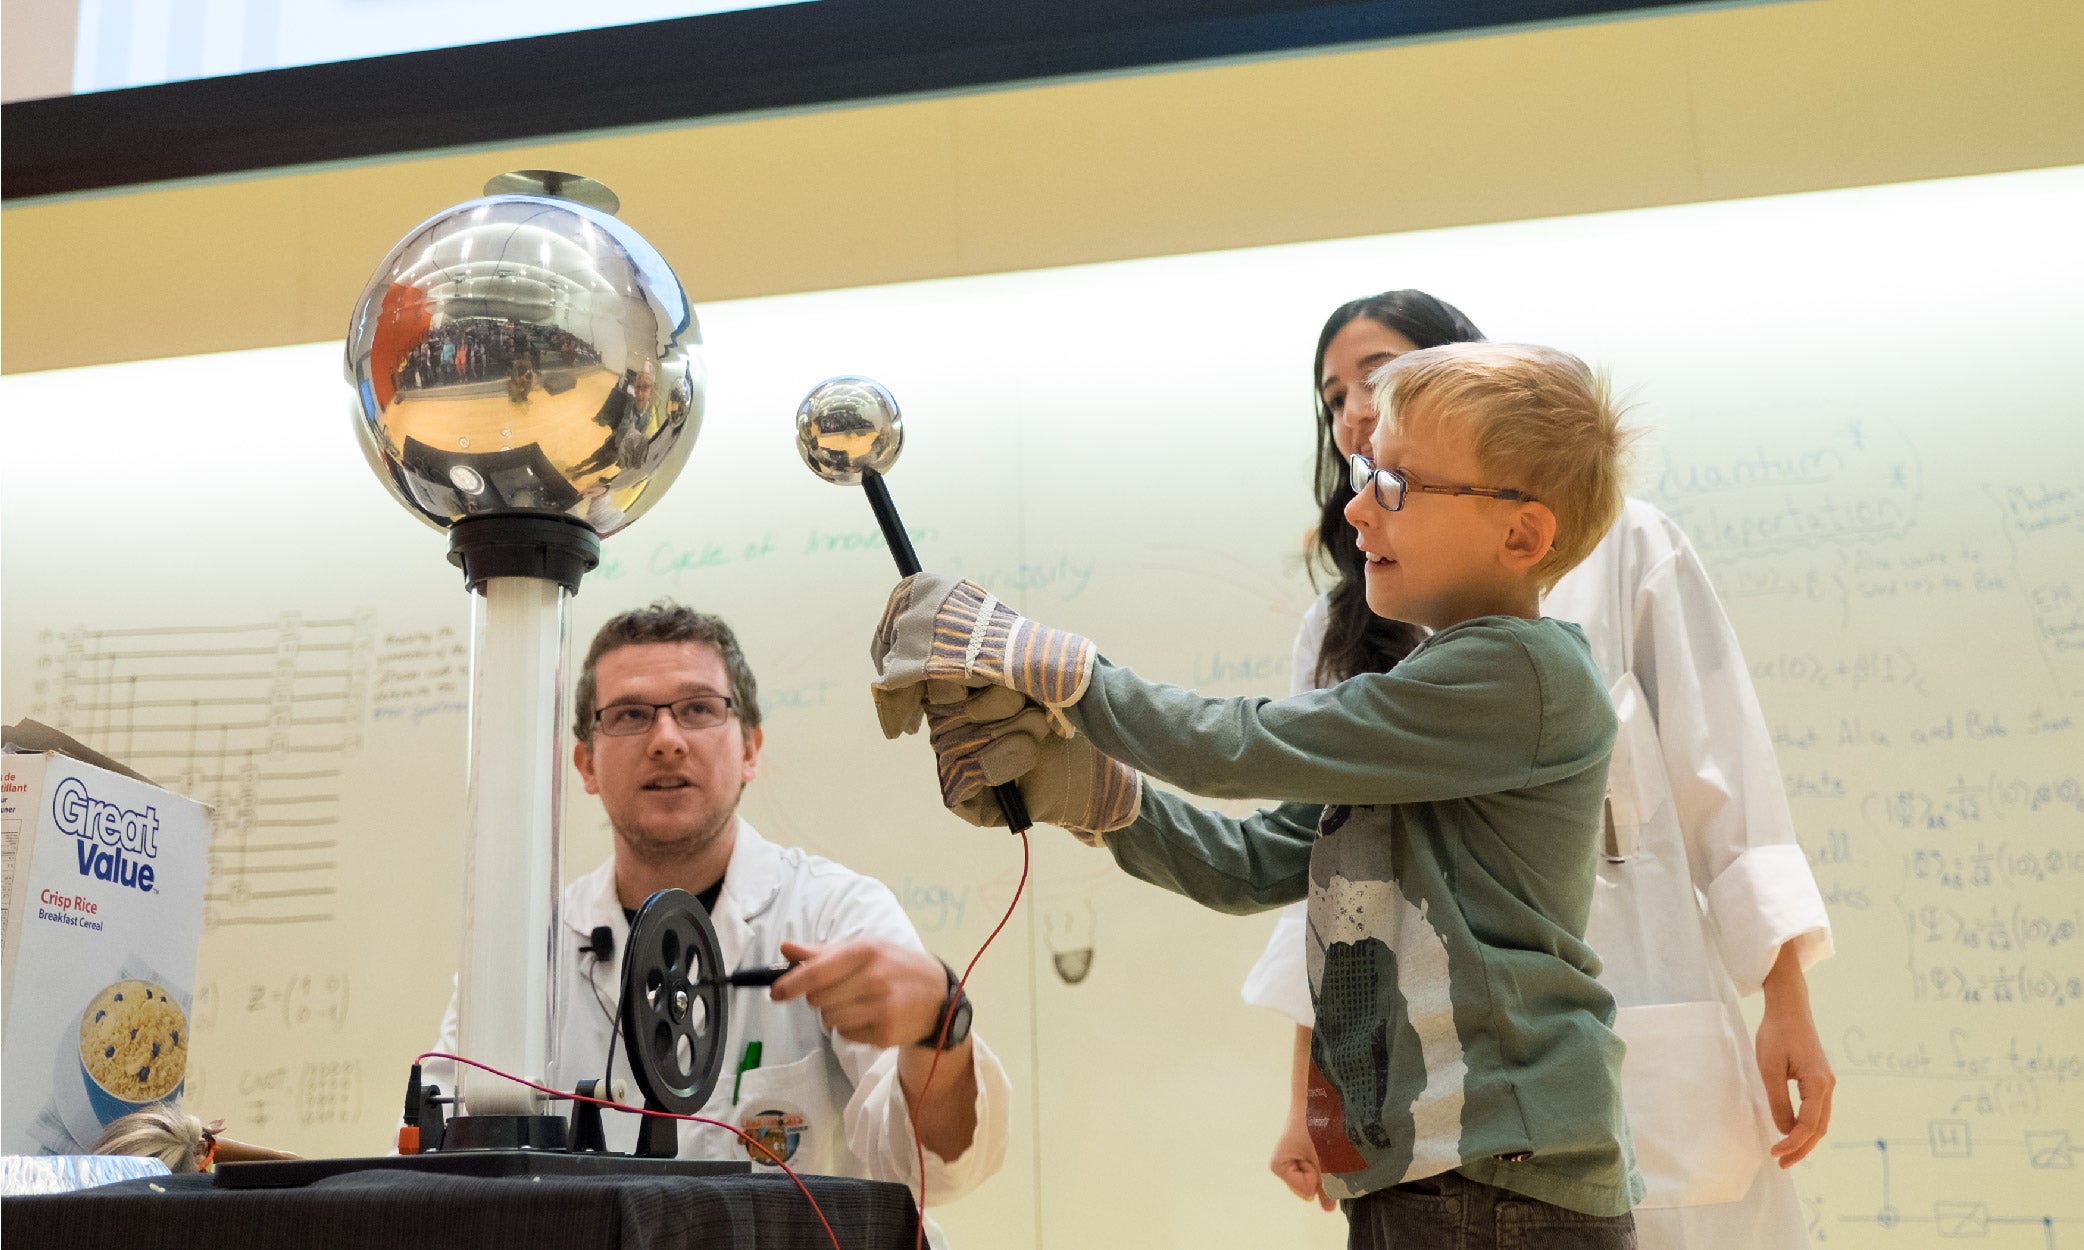 Young child takes part in a quantum science demonstration